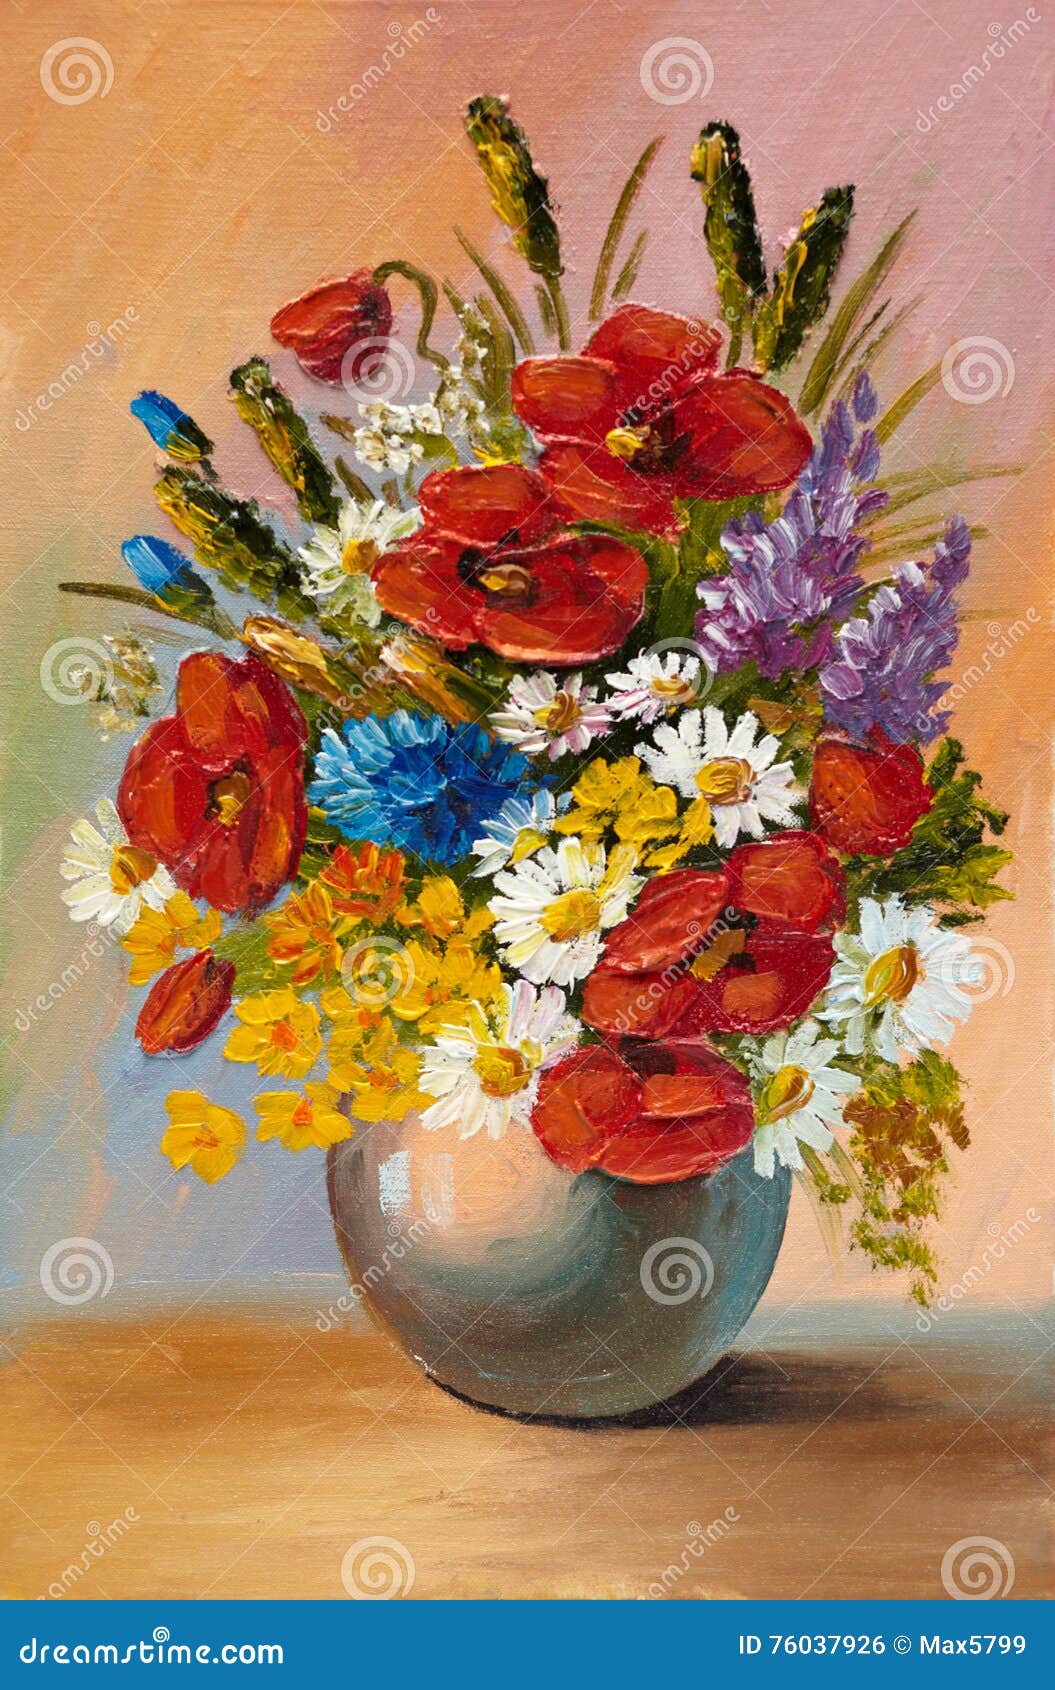 oil painting of spring flowers in a vase on canvas. abstract